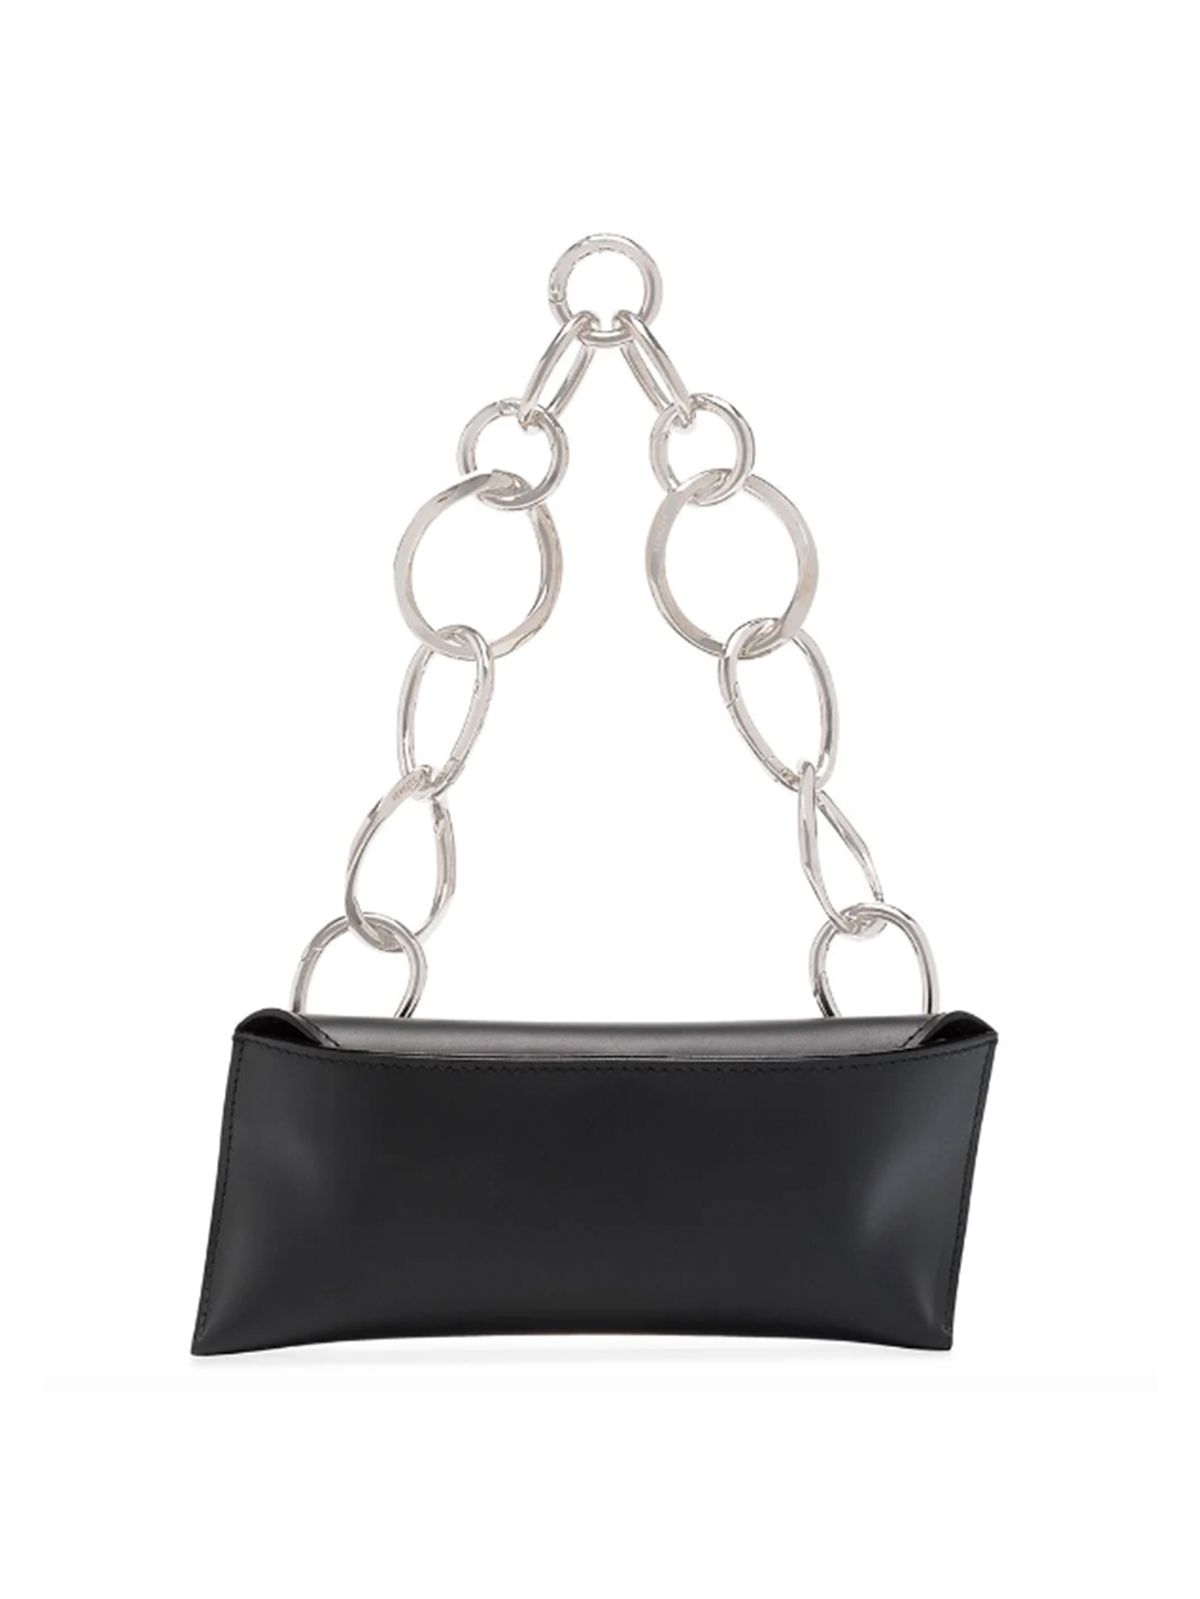 The 27 Best Chain Handbags at Every Price Point | Who What Wear